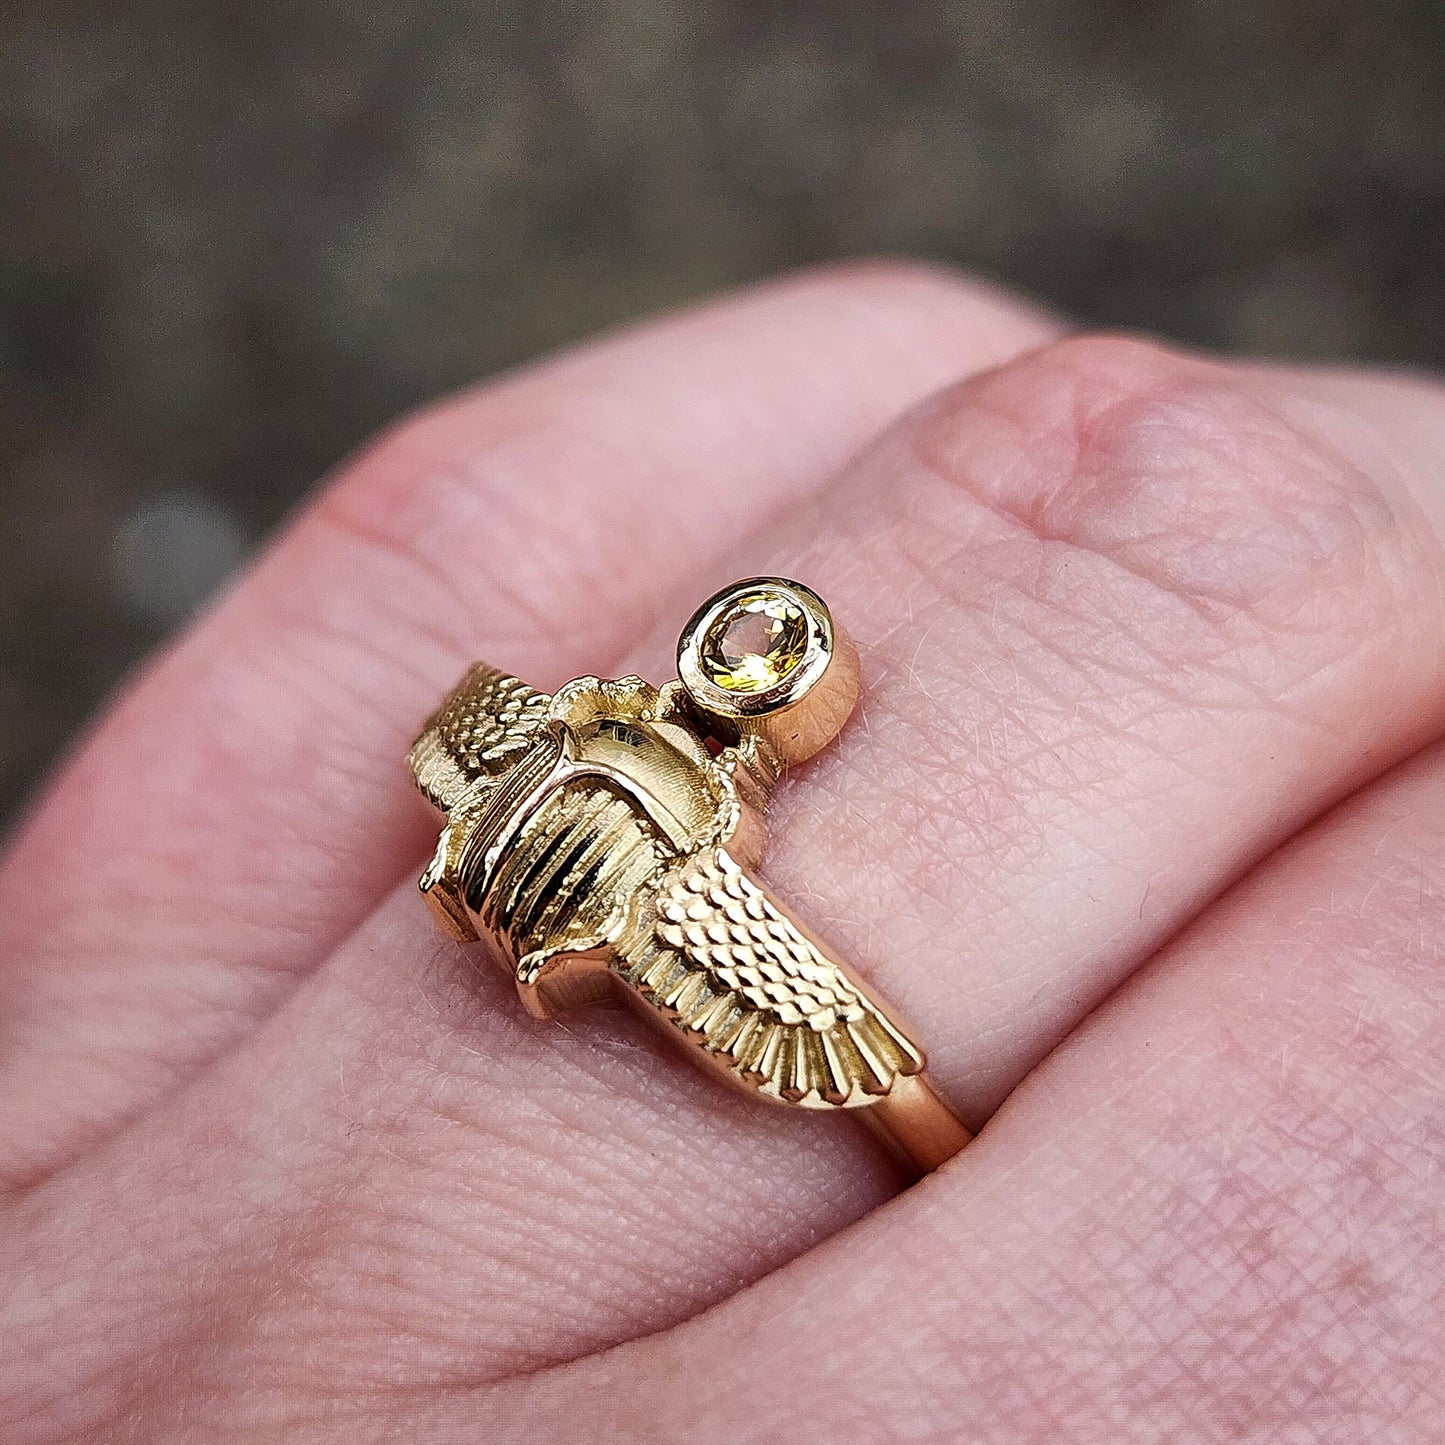 Load image into Gallery viewer, Ready to Ship Size 6-8 - Yellow Sapphire Winged Beetle Ring - Sun Scarab - 14k Yellow Gold or Sterling Silver Egyptian Ring Fine Bug Jewelry
